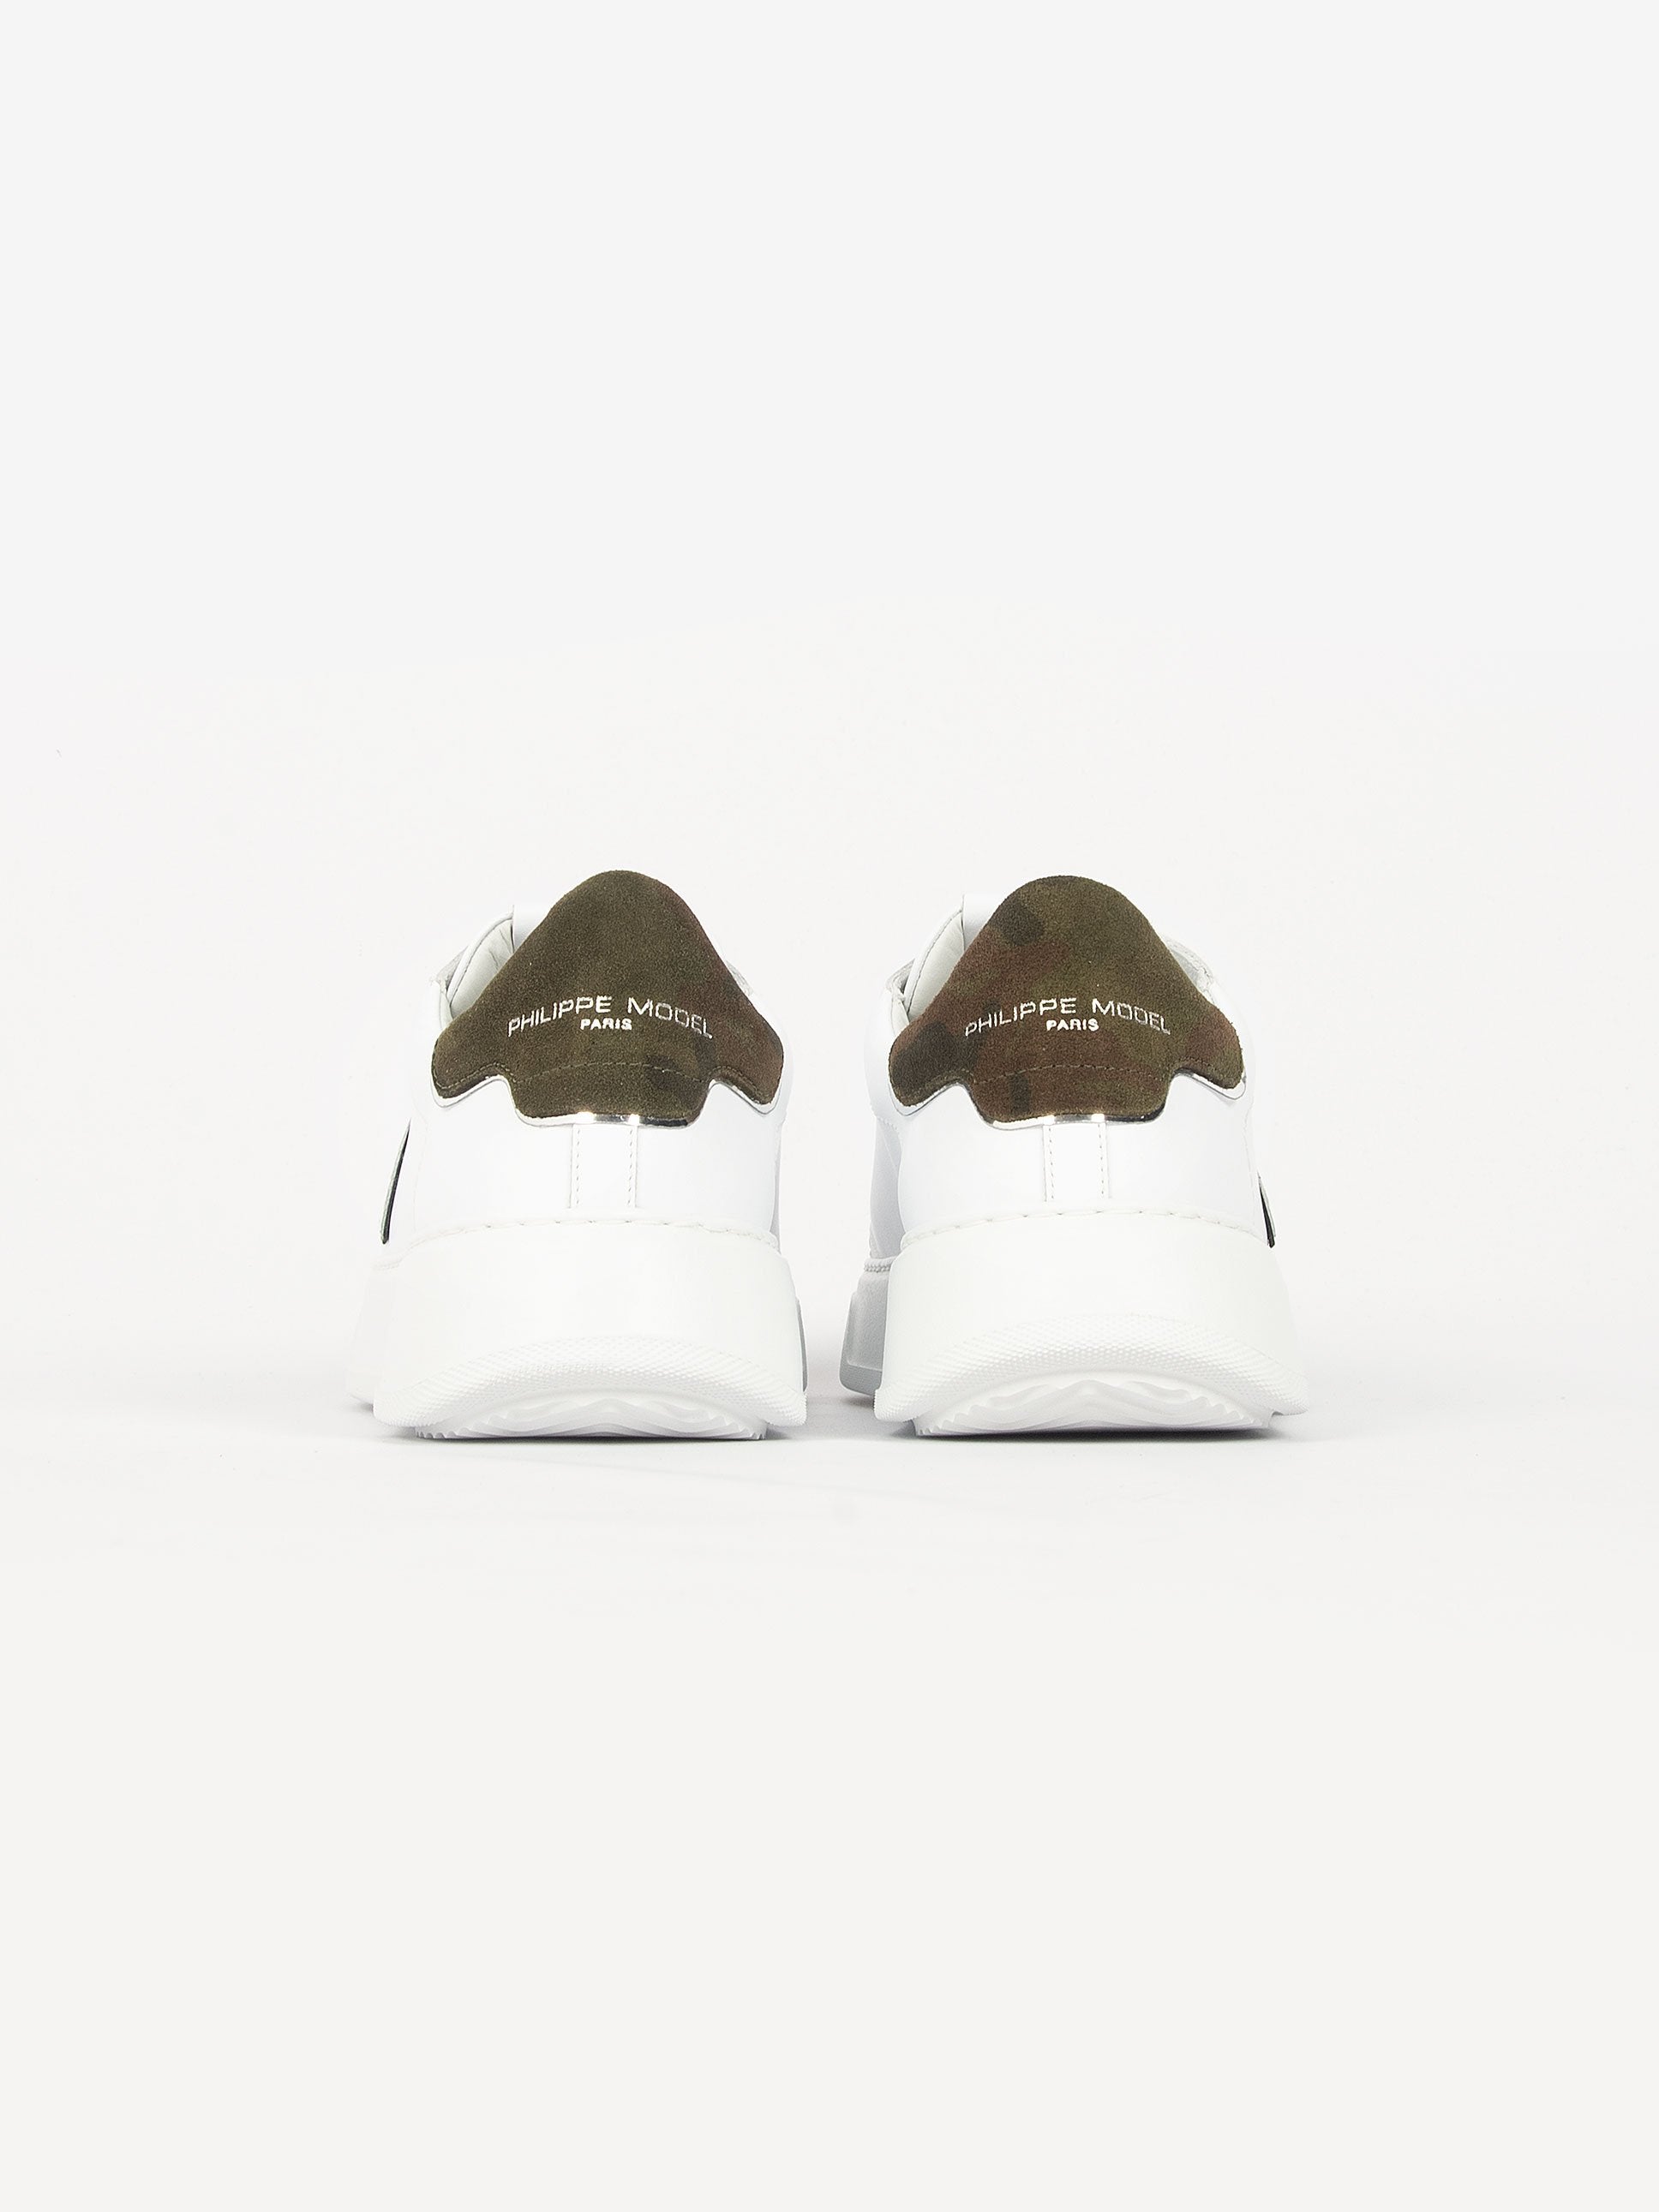 Sneakers 'Temple Veau' Camouflage - Bianco/Militare